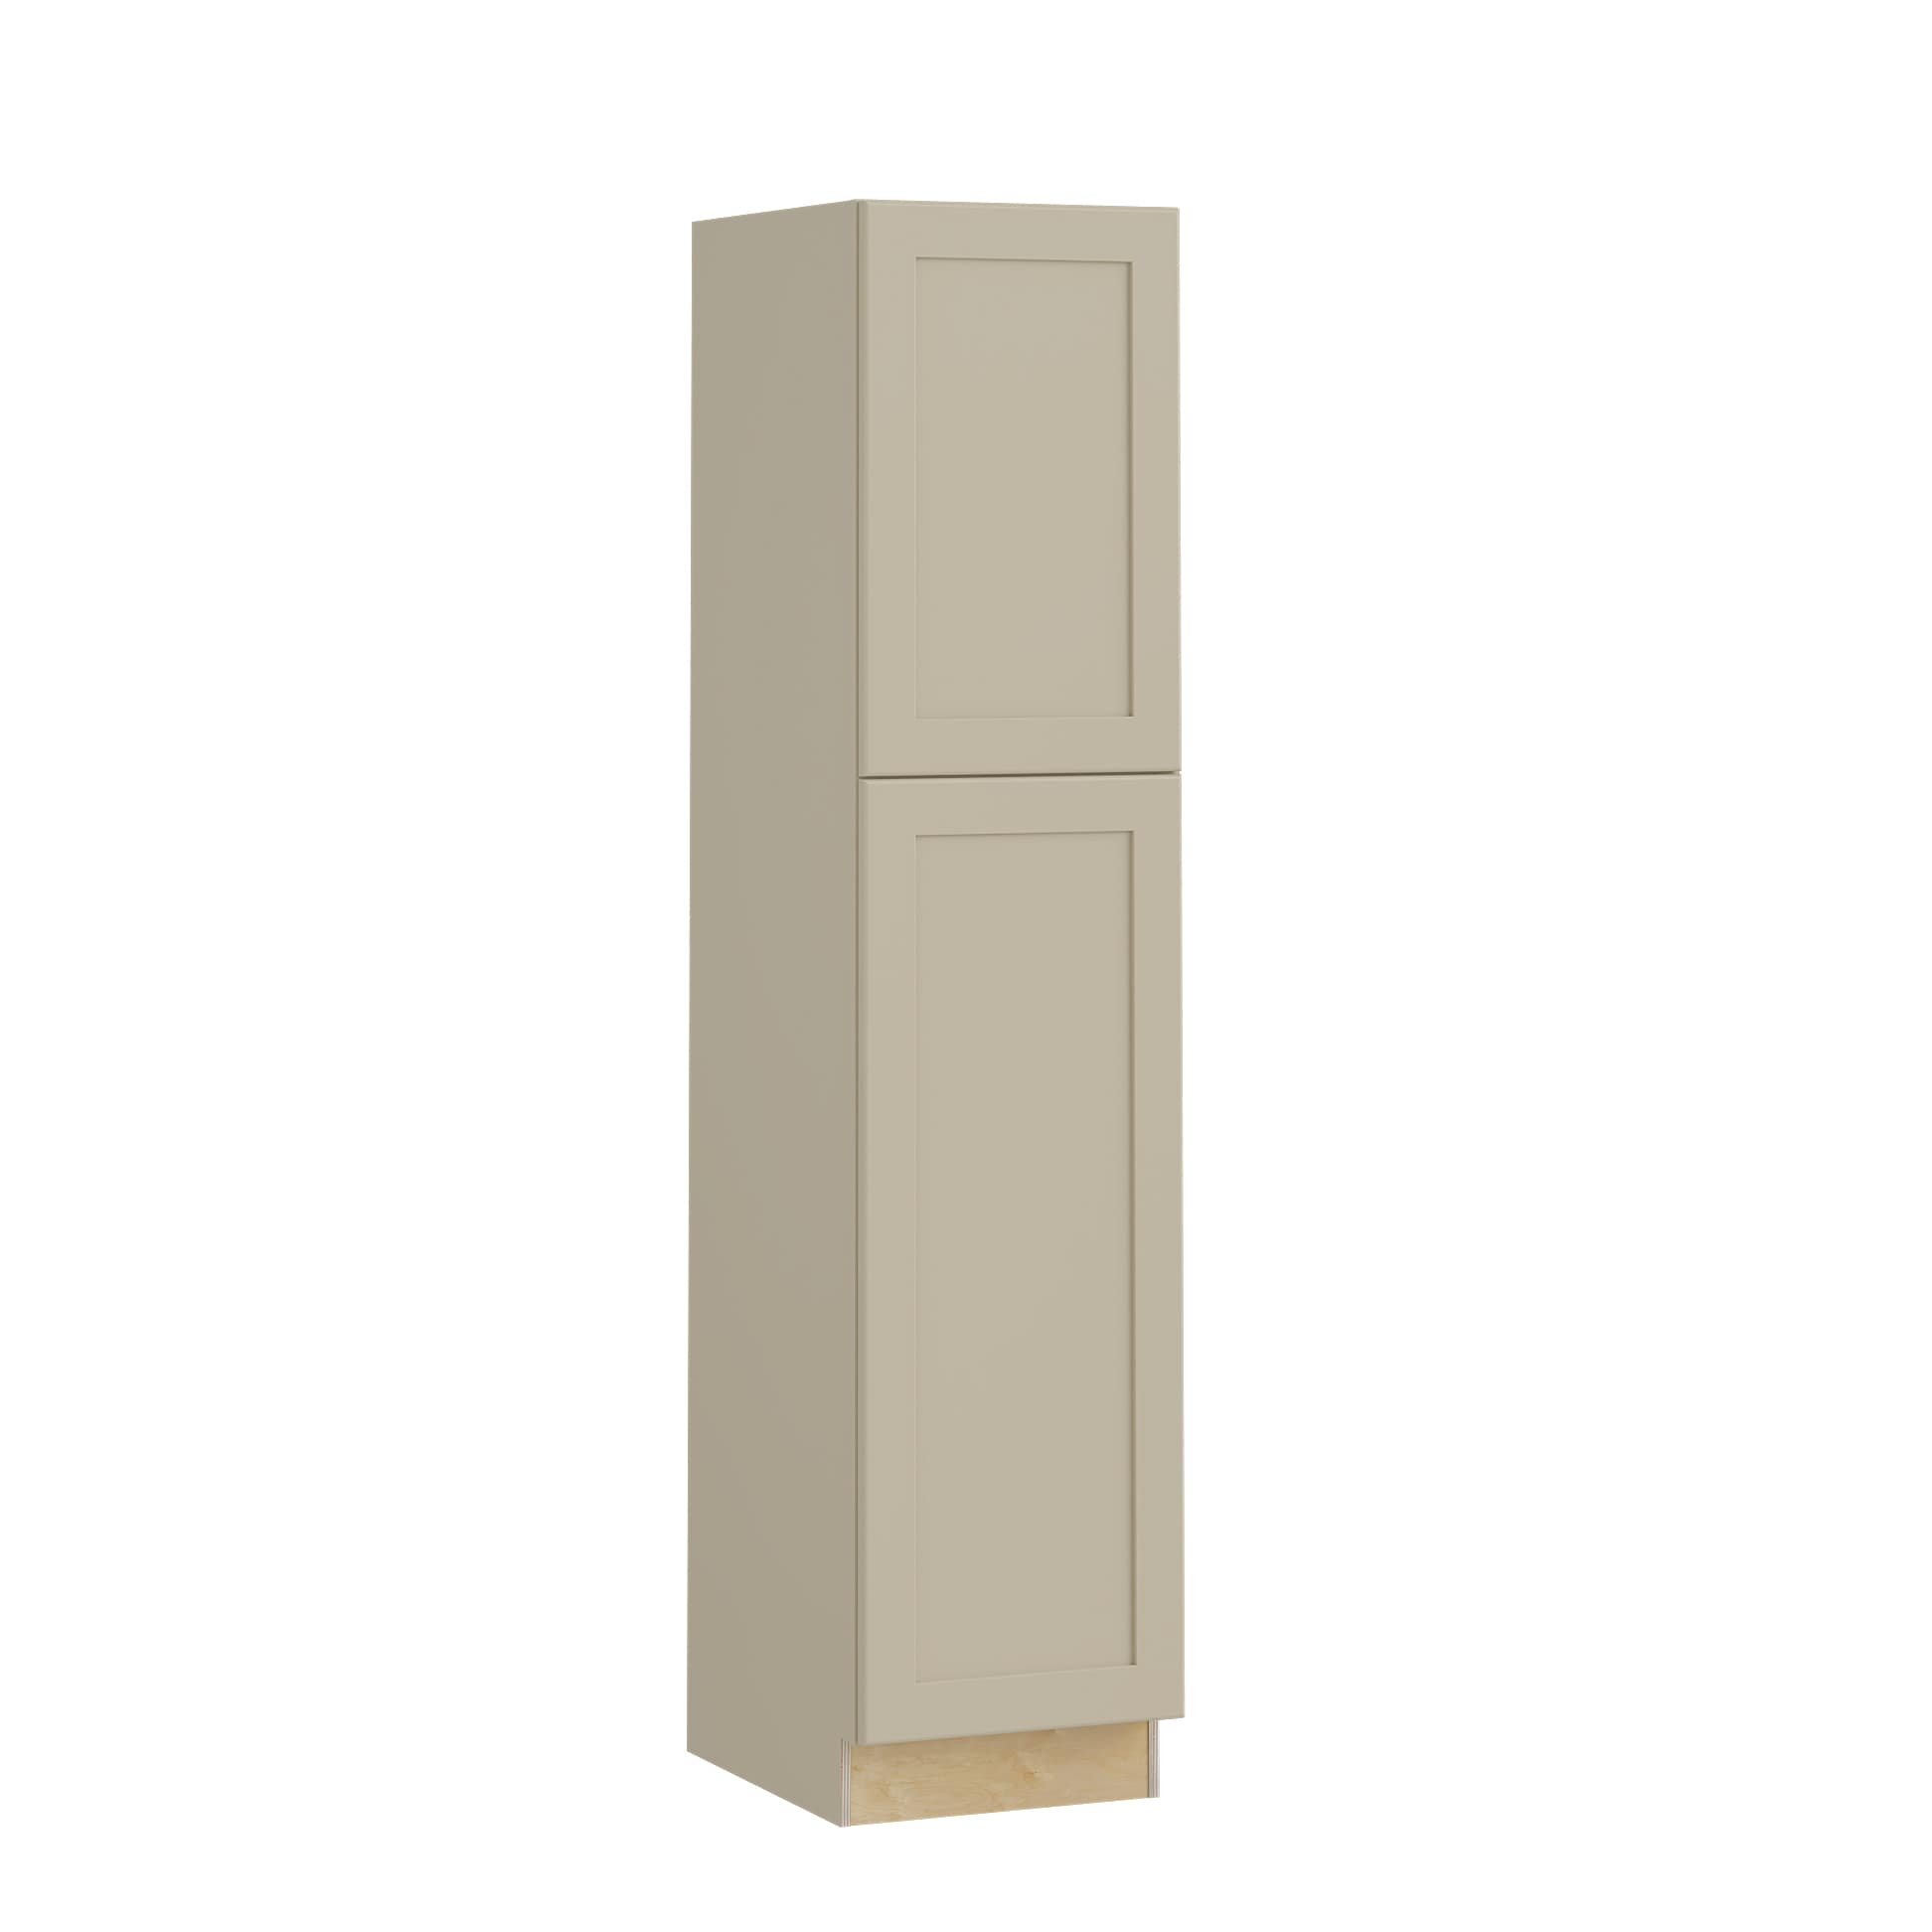 Luxxe Cabinetry 18-in W x 84-in H x 21-in D Norfolk Blended Cream Painted Door Pantry Fully Assembled Semi-custom Cabinet in Off-White